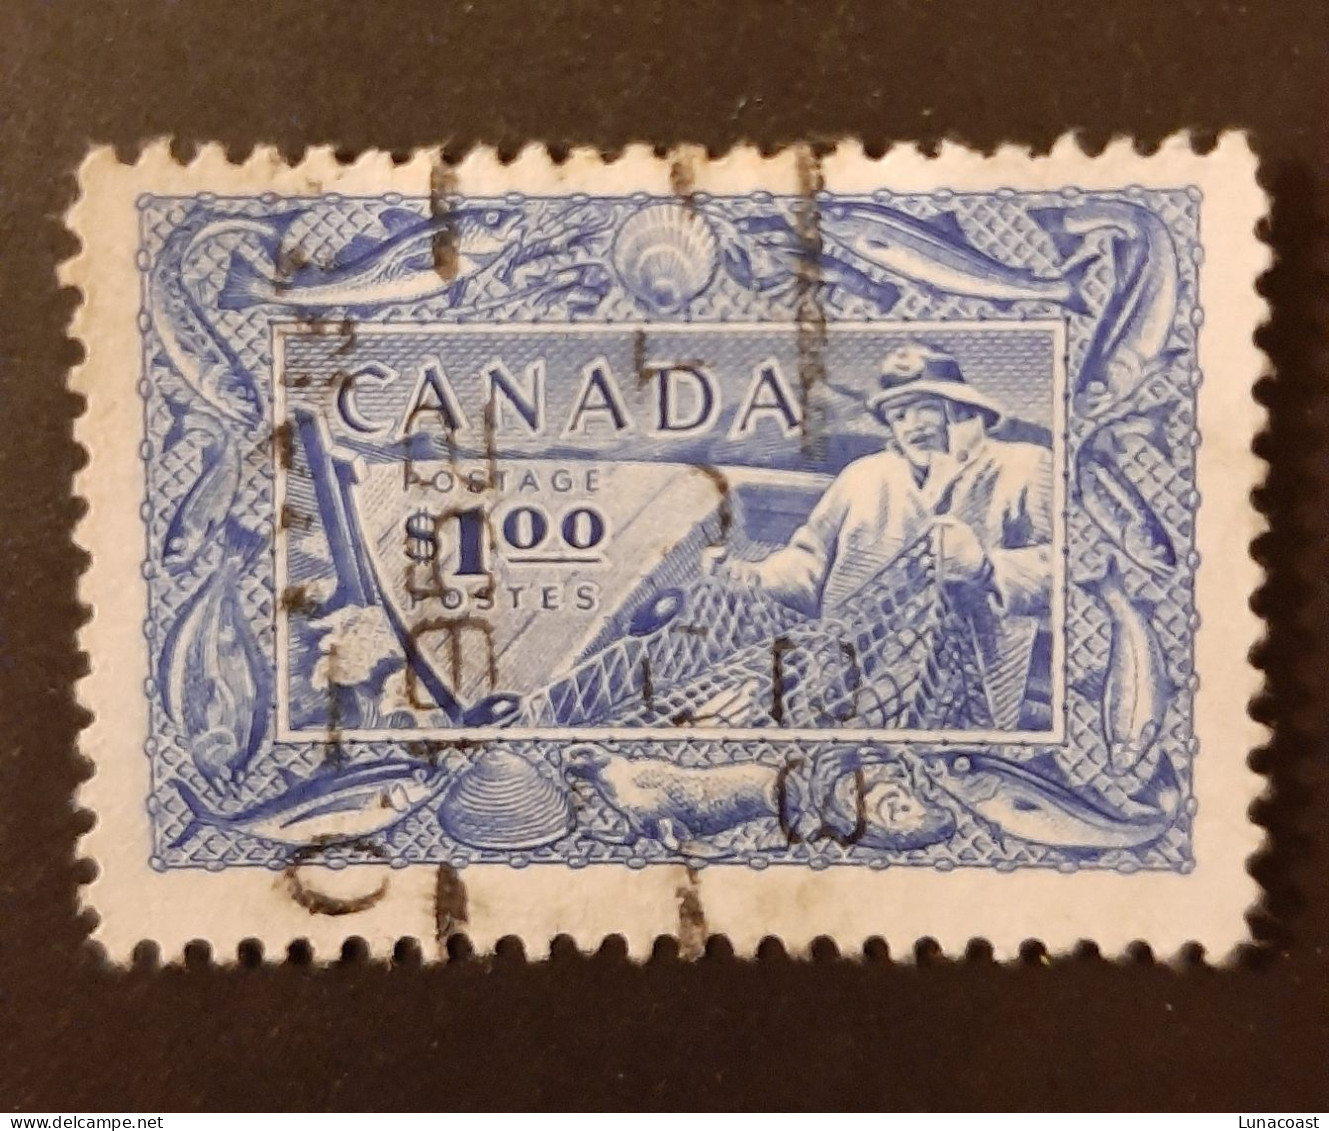 Canada 1951  USED  Sc 302,    1$ Fishing Resources - Used Stamps